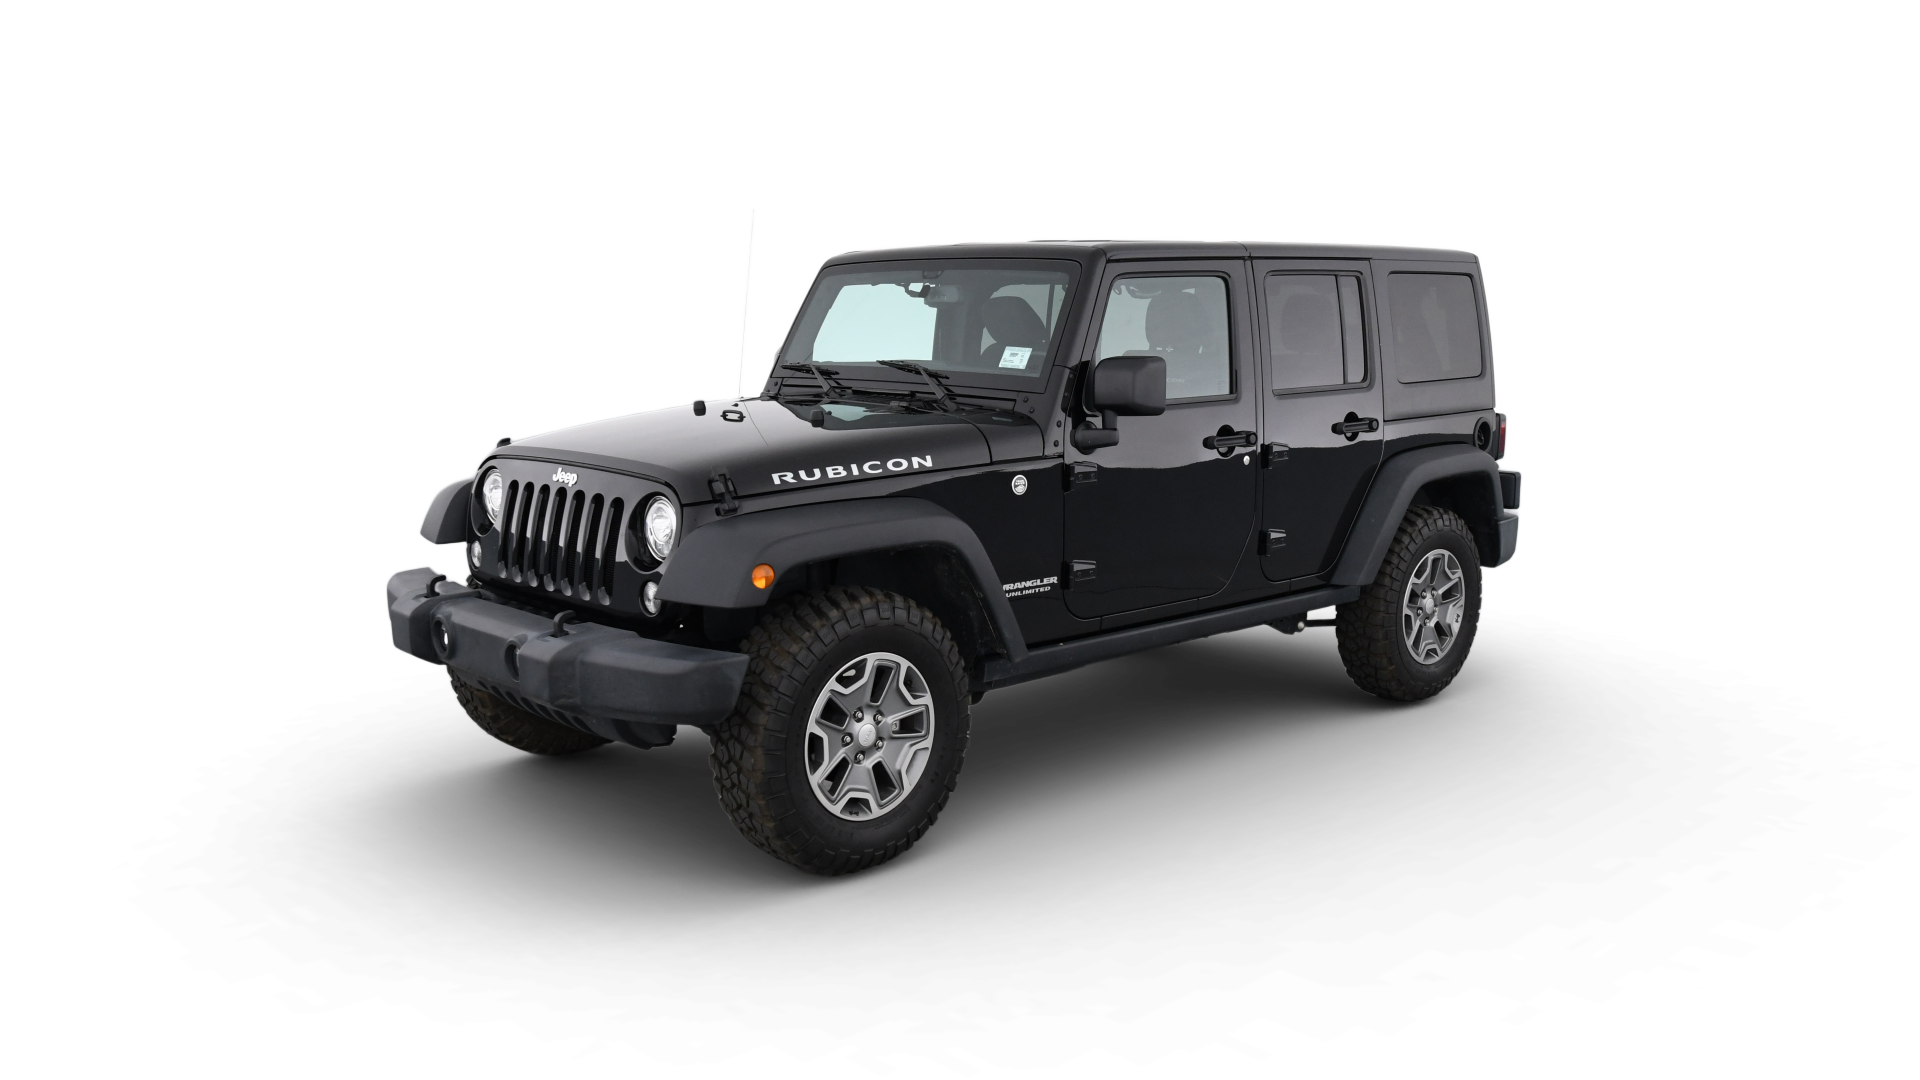 Used Black Jeep Rubicon For Sale Online | Carvana